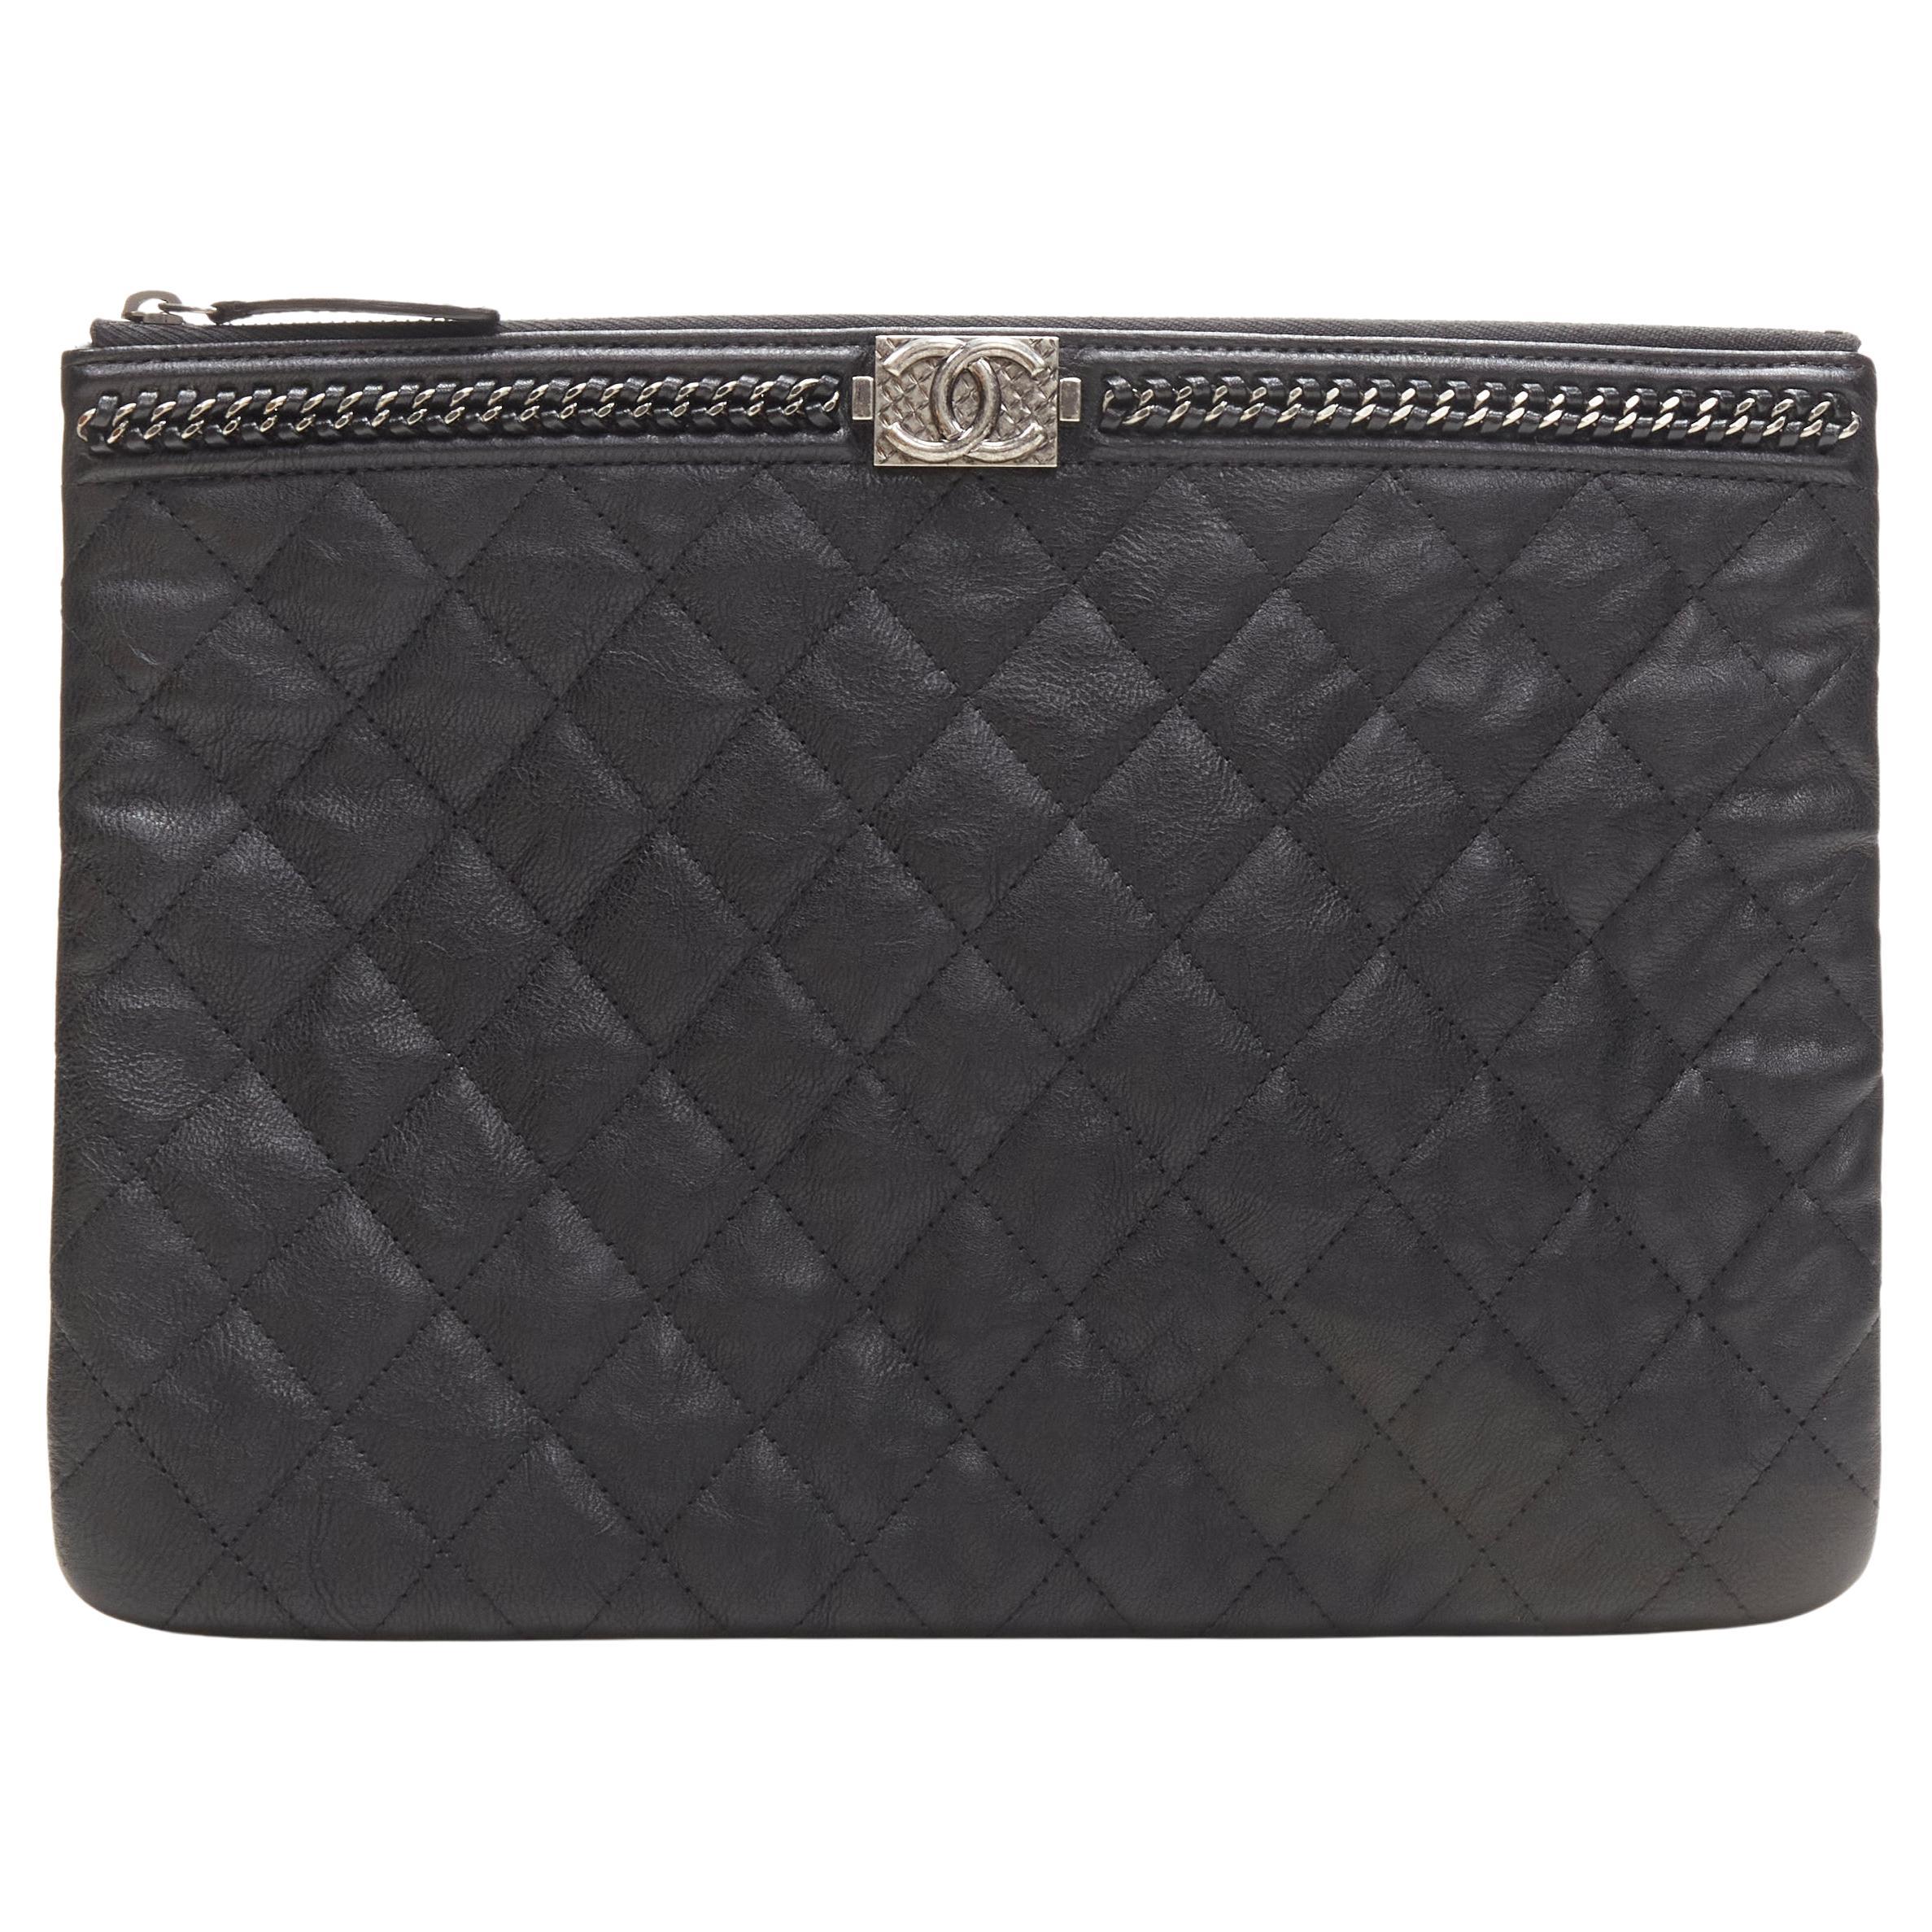 Chanel Quilted Patent Leather Shoulder Bag - Wyld Blue